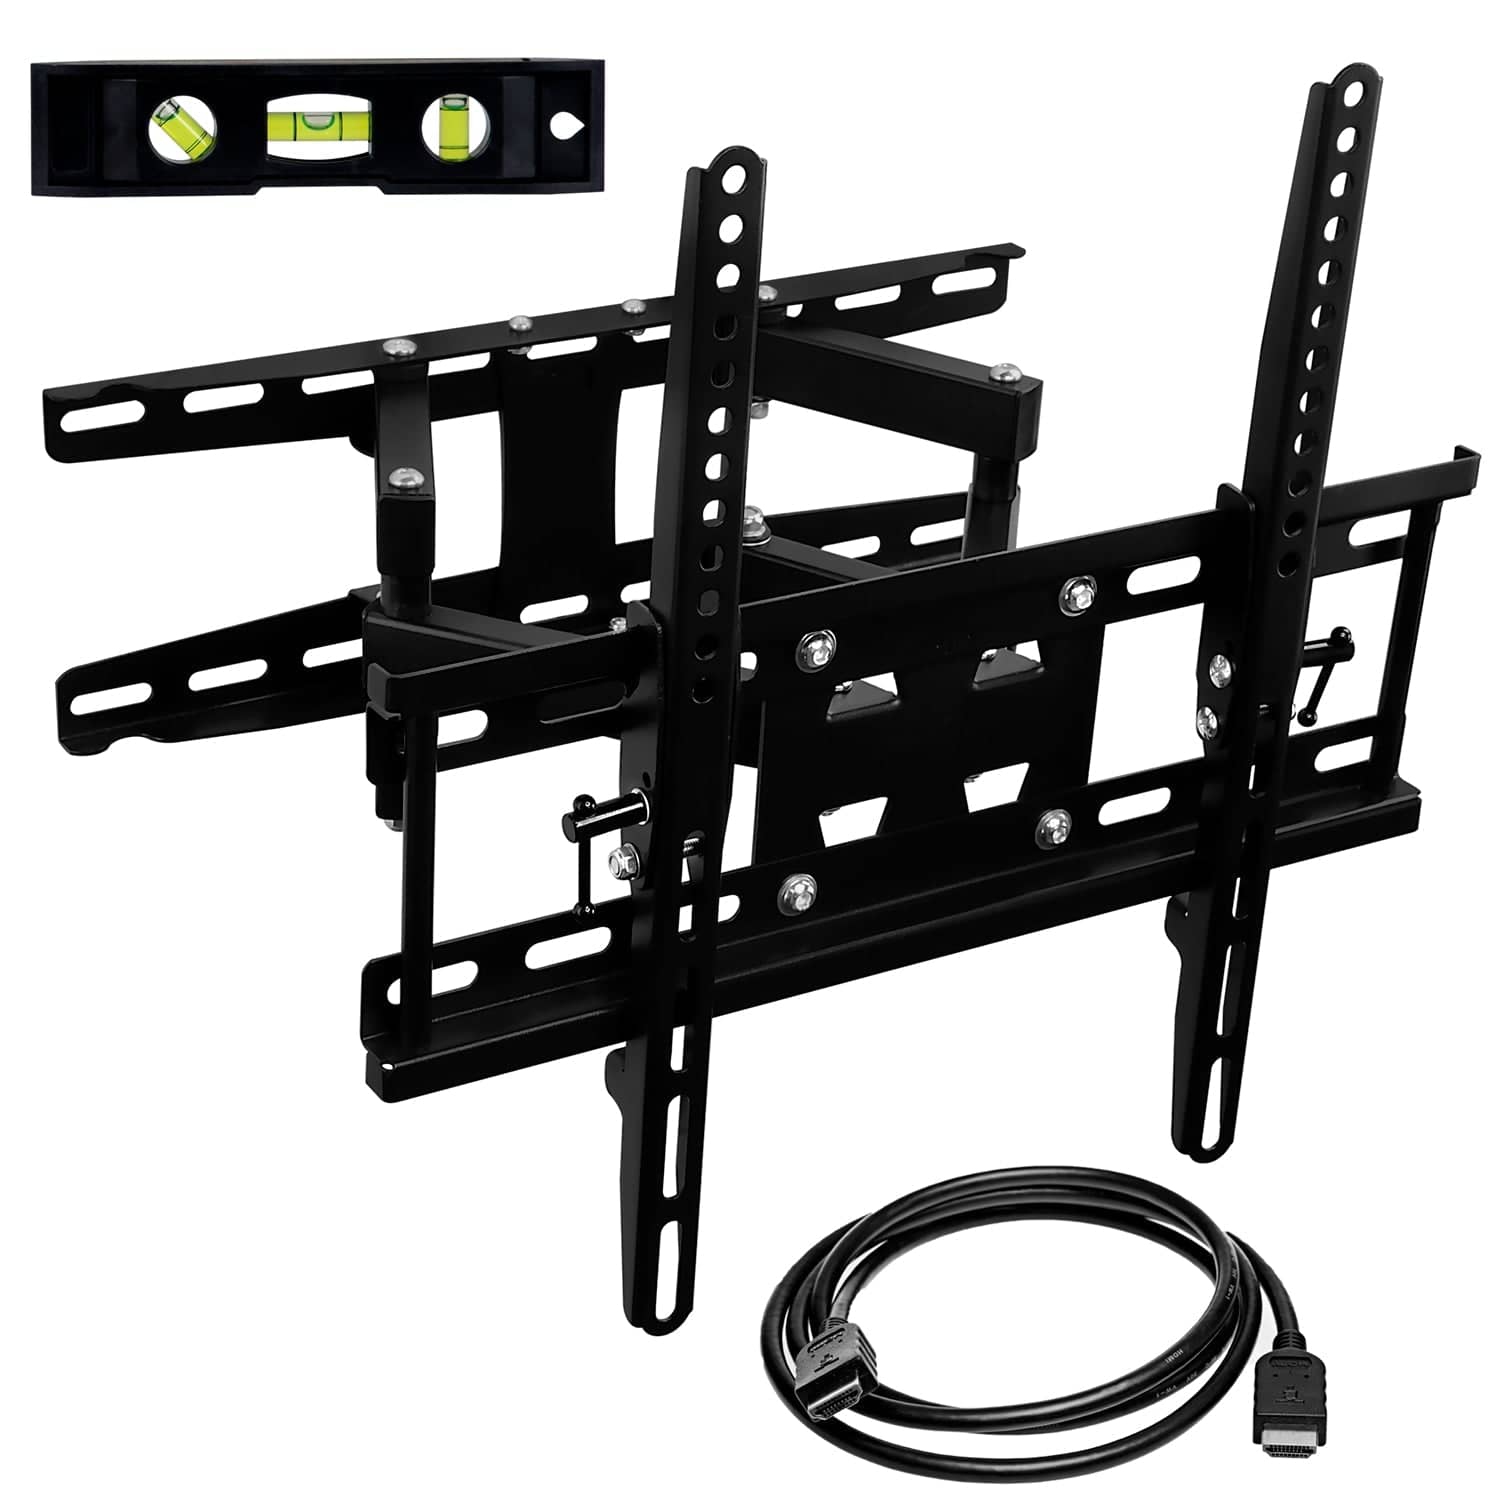 Mount-it! Full Motion Dual Arm TV Wall Mount w/ Extension (MI-4461), Arm Extends Up to 13.5", Fits 20" to 50" TVs